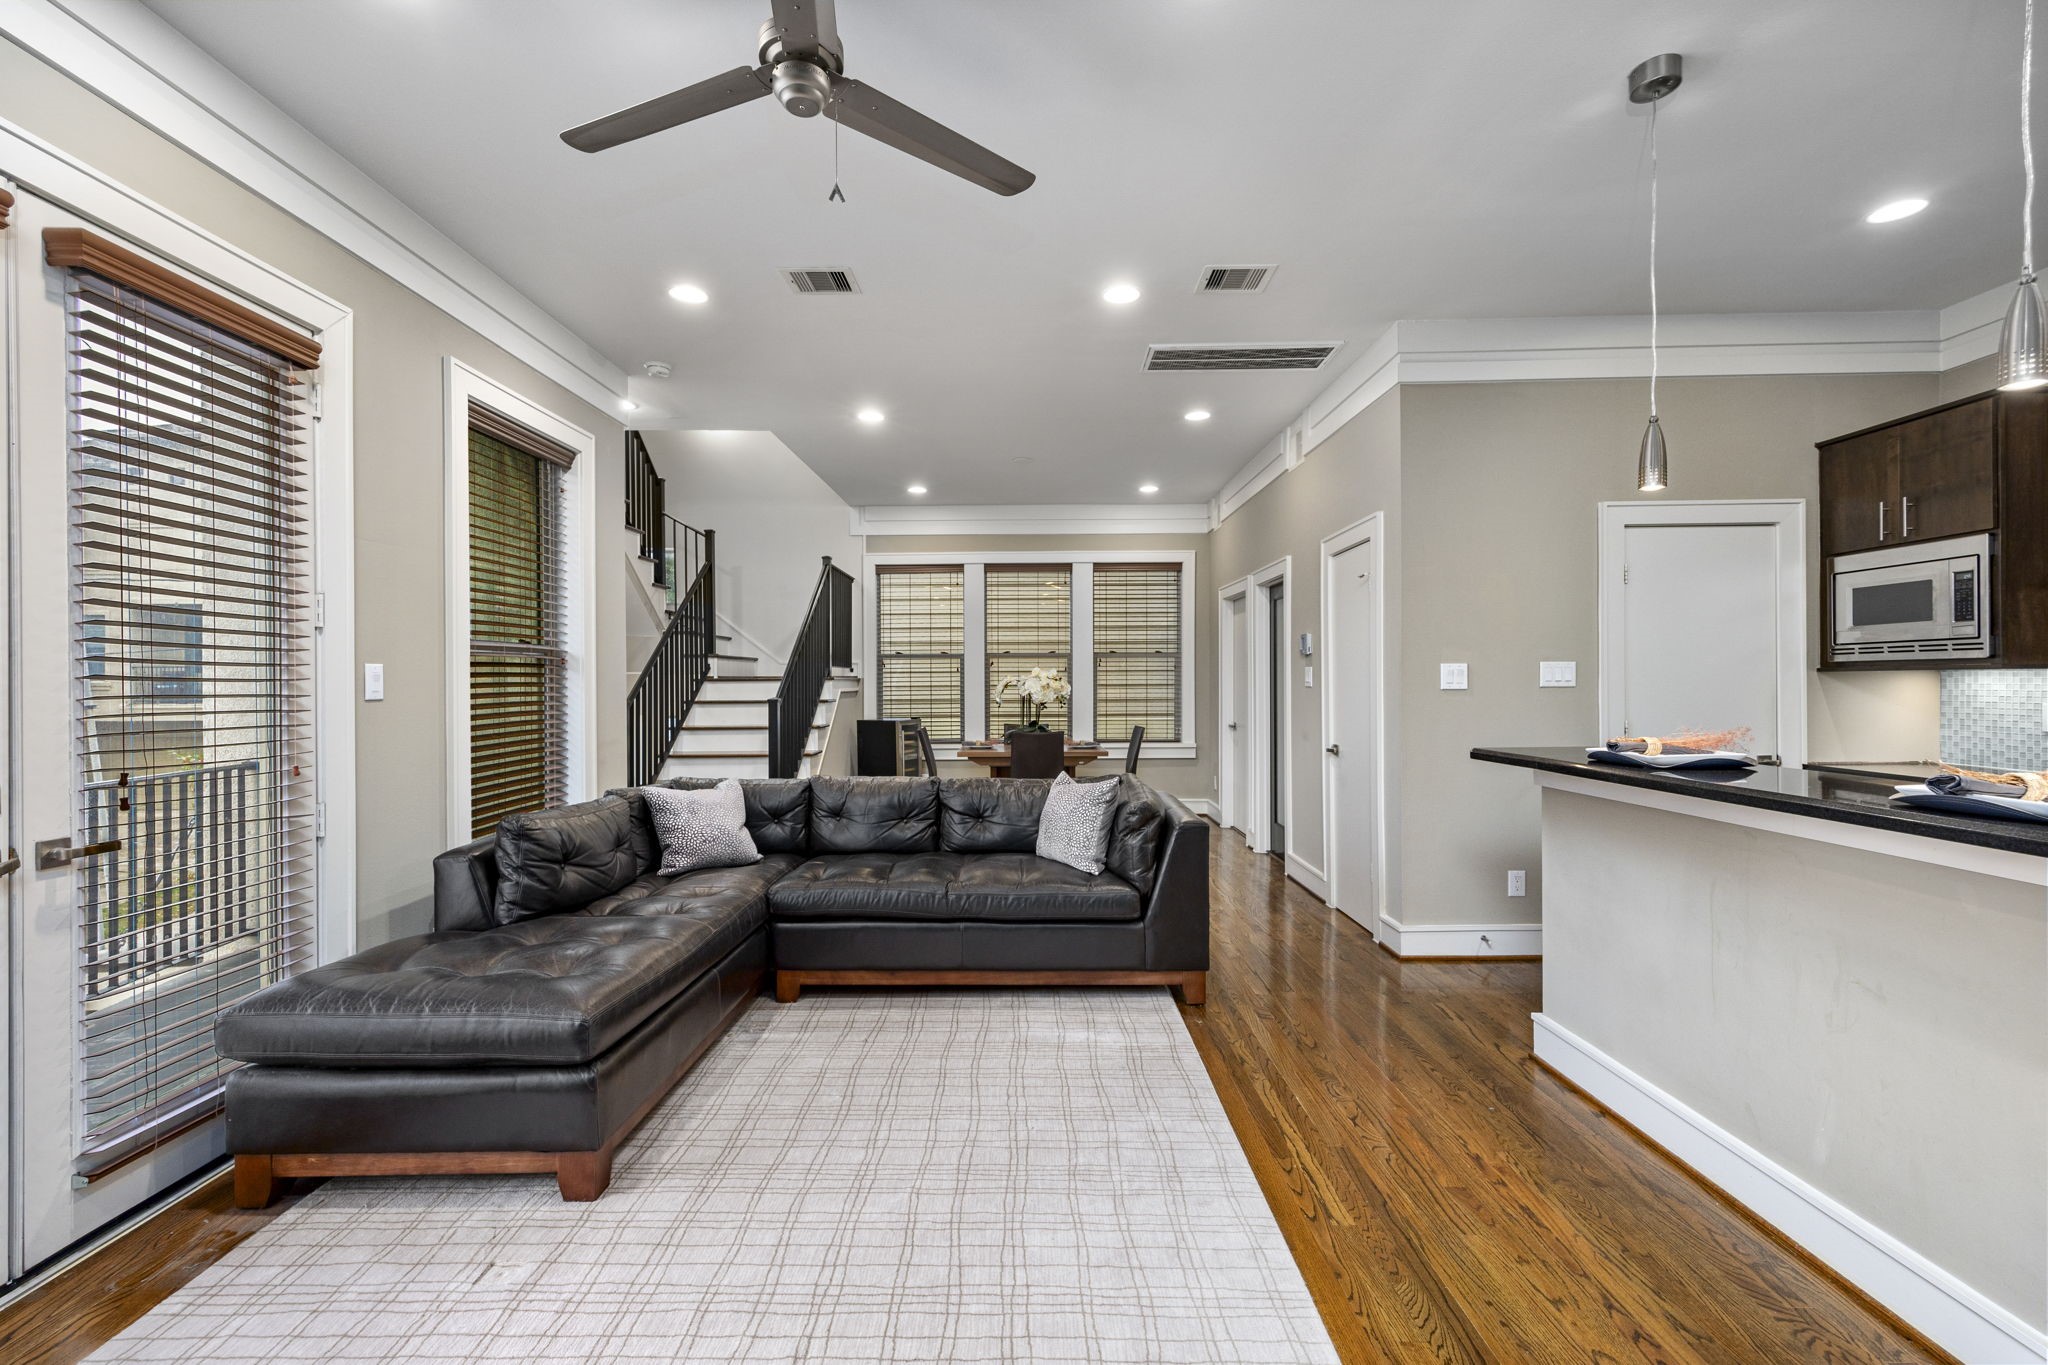 This living room is centrally situated overlooking the kitchen and dining area for your after-dinner conversations! 322 Patterson St., Houston, TX  77007